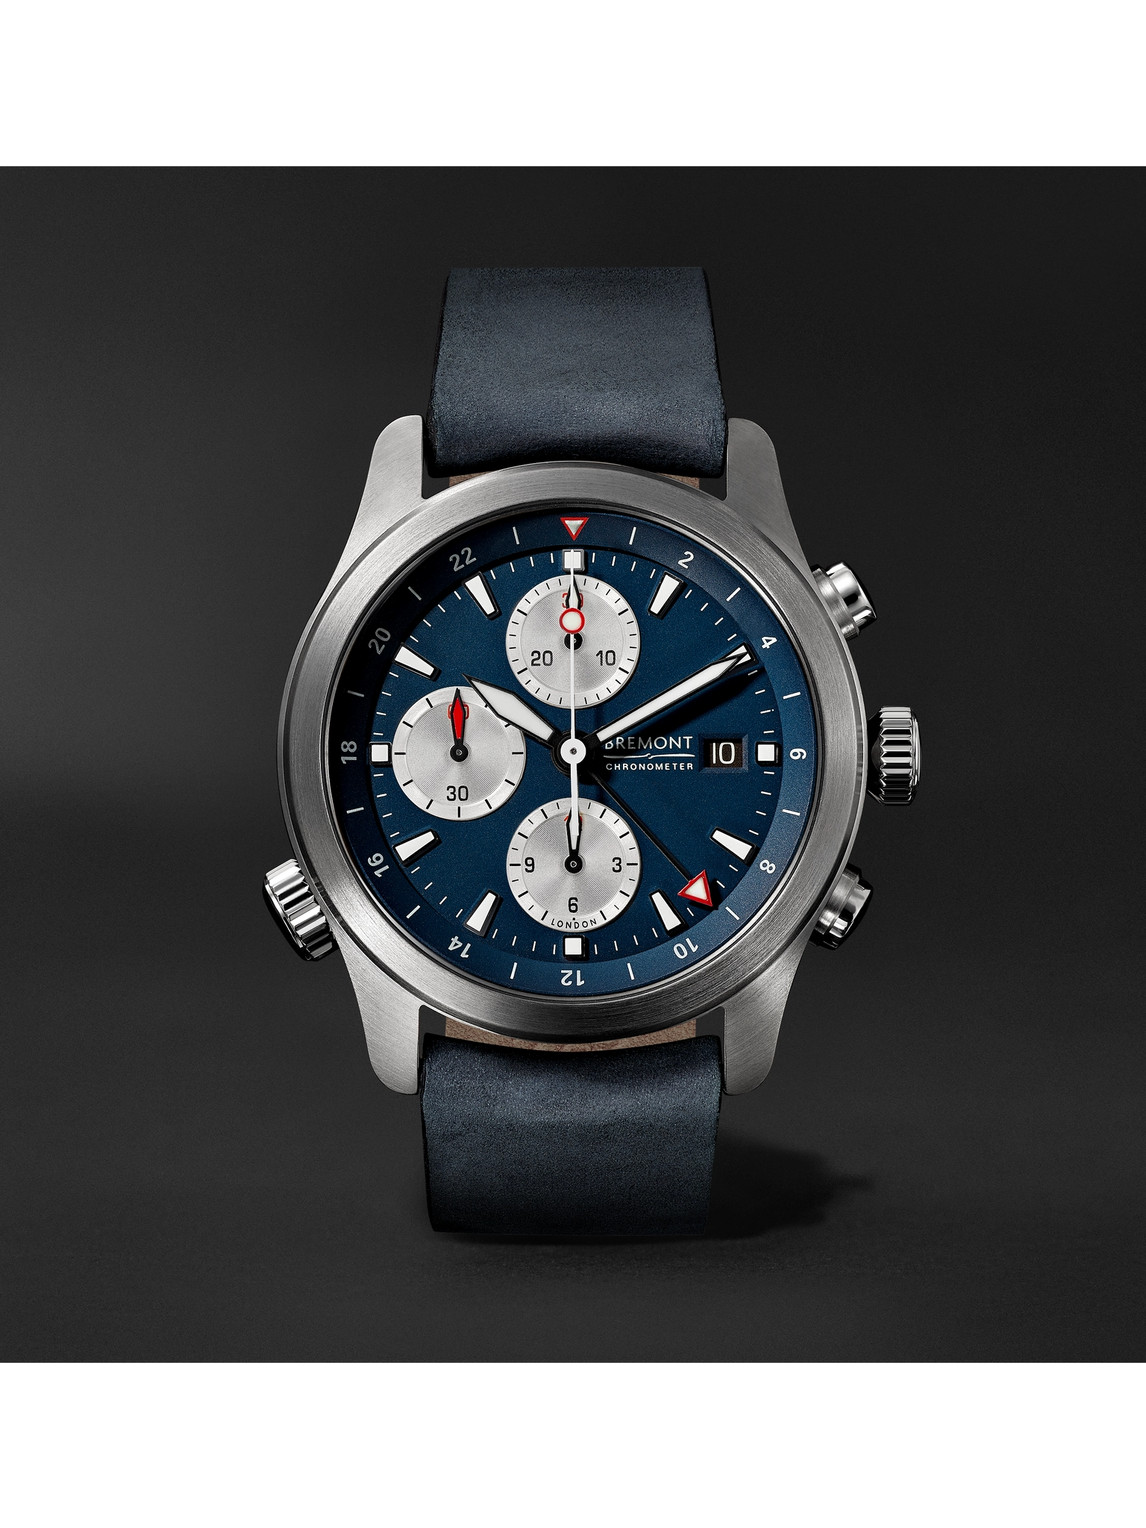 Limited Edition Automatic GMT Chronograph 43mm Stainless Steel and Leather Watch, Ref. No. ALT1-ZT-BL-R-S